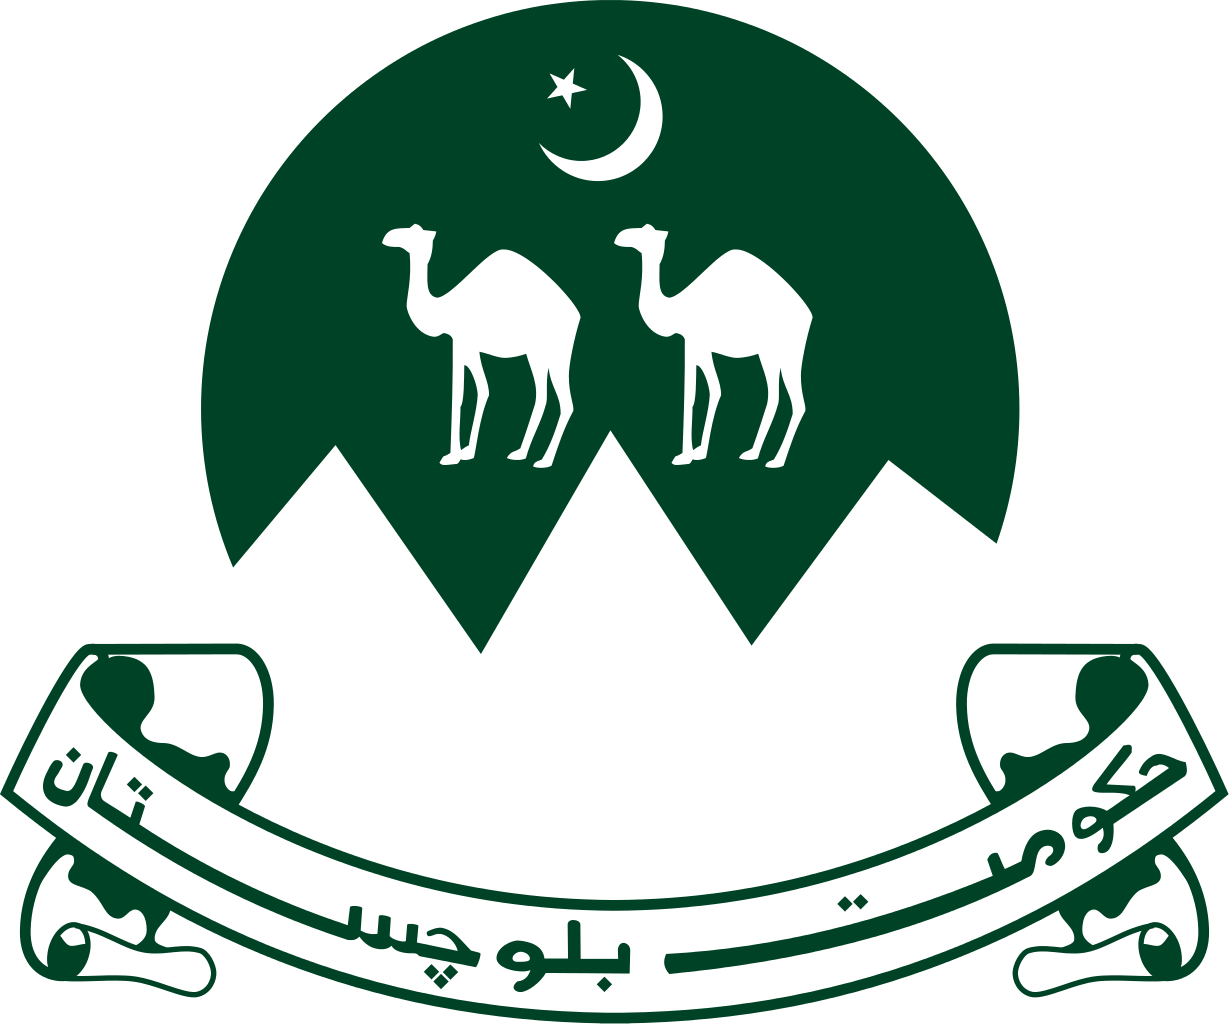 1229px-Coat_of_arms_of_Balochistan.svg